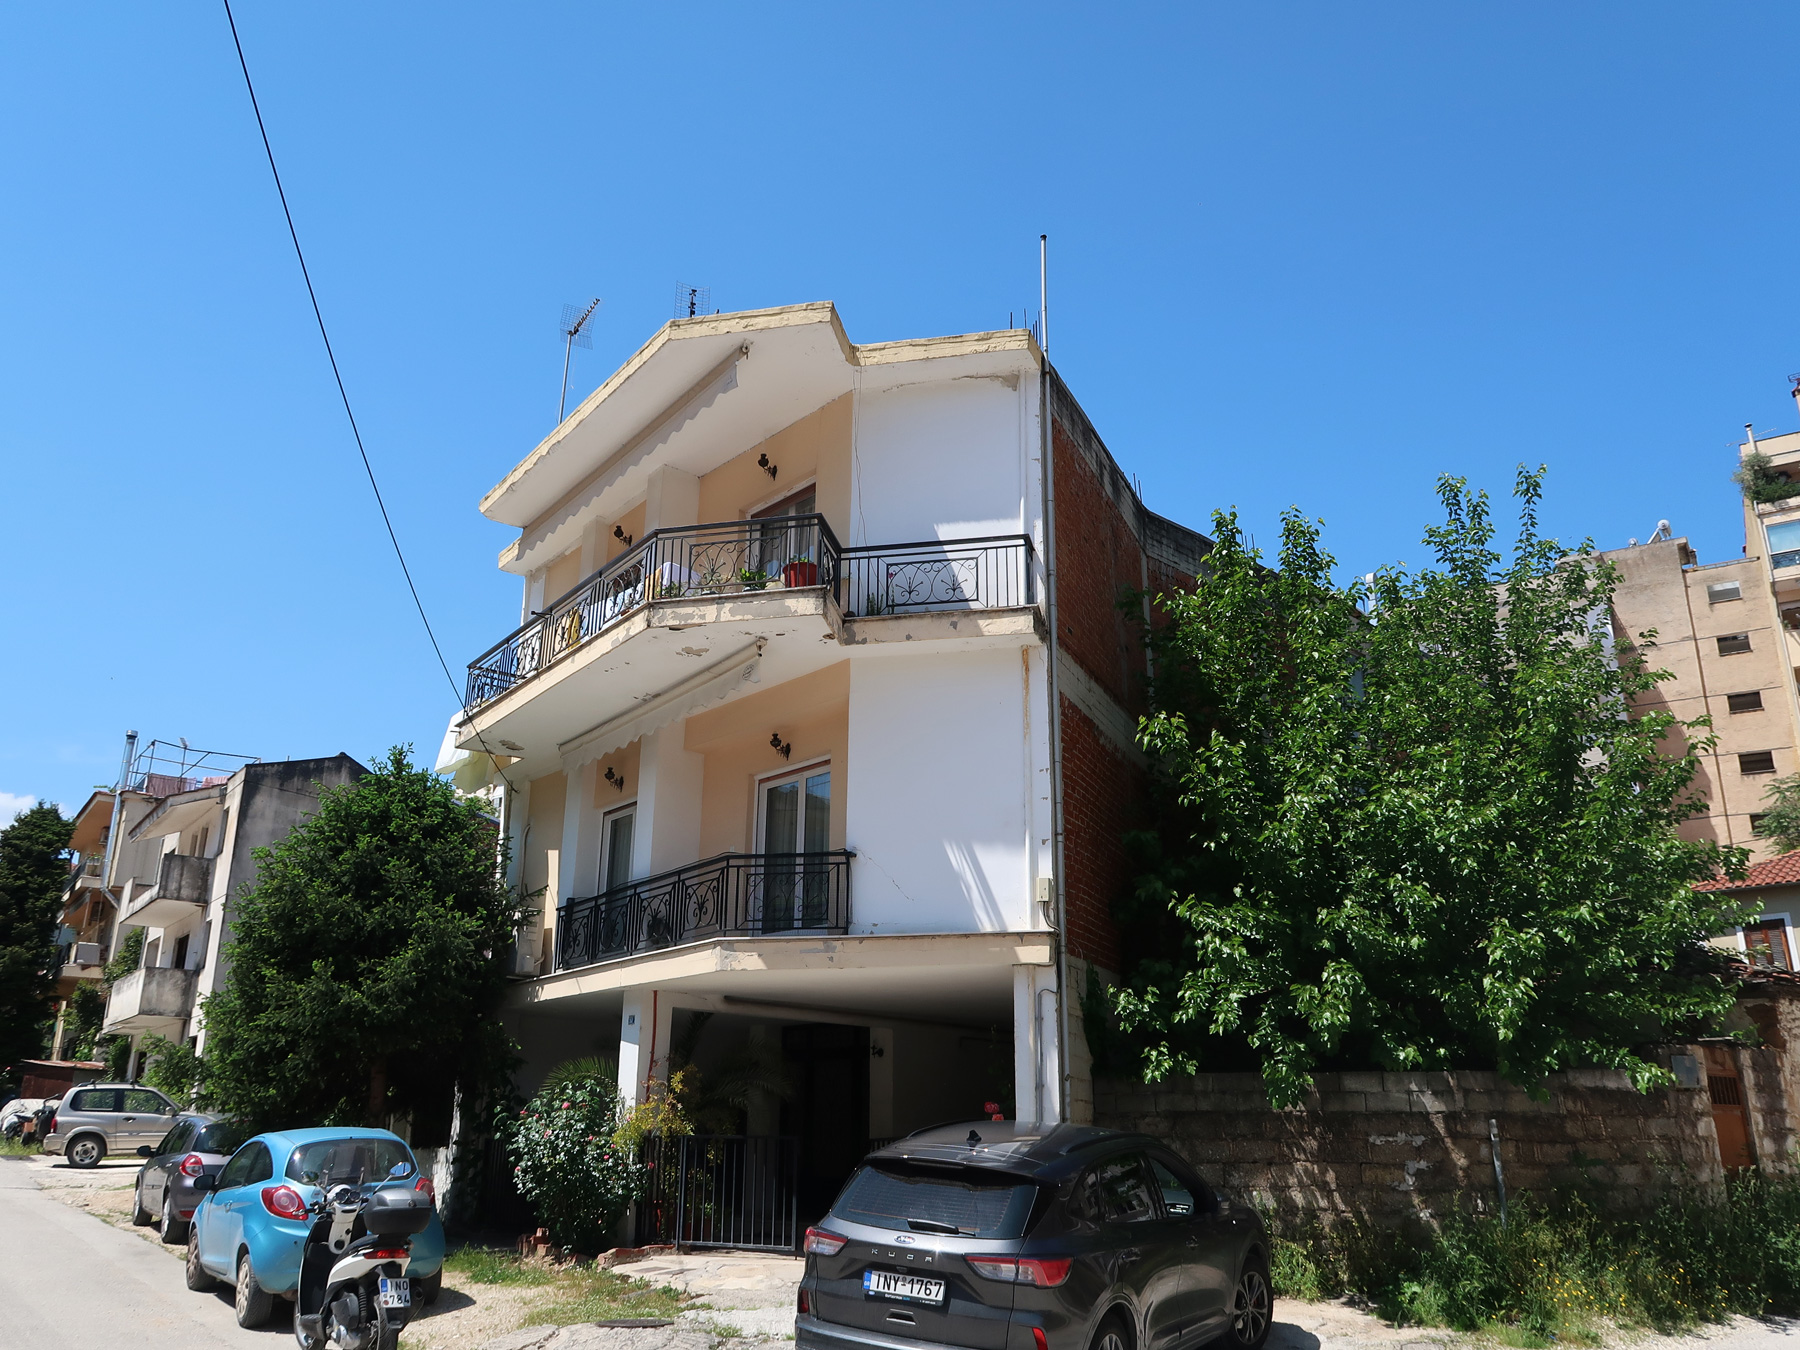 For sale 2 bedroom apartment of 126 sq.m. 2nd floor at Agiou Kosma in Ioannina